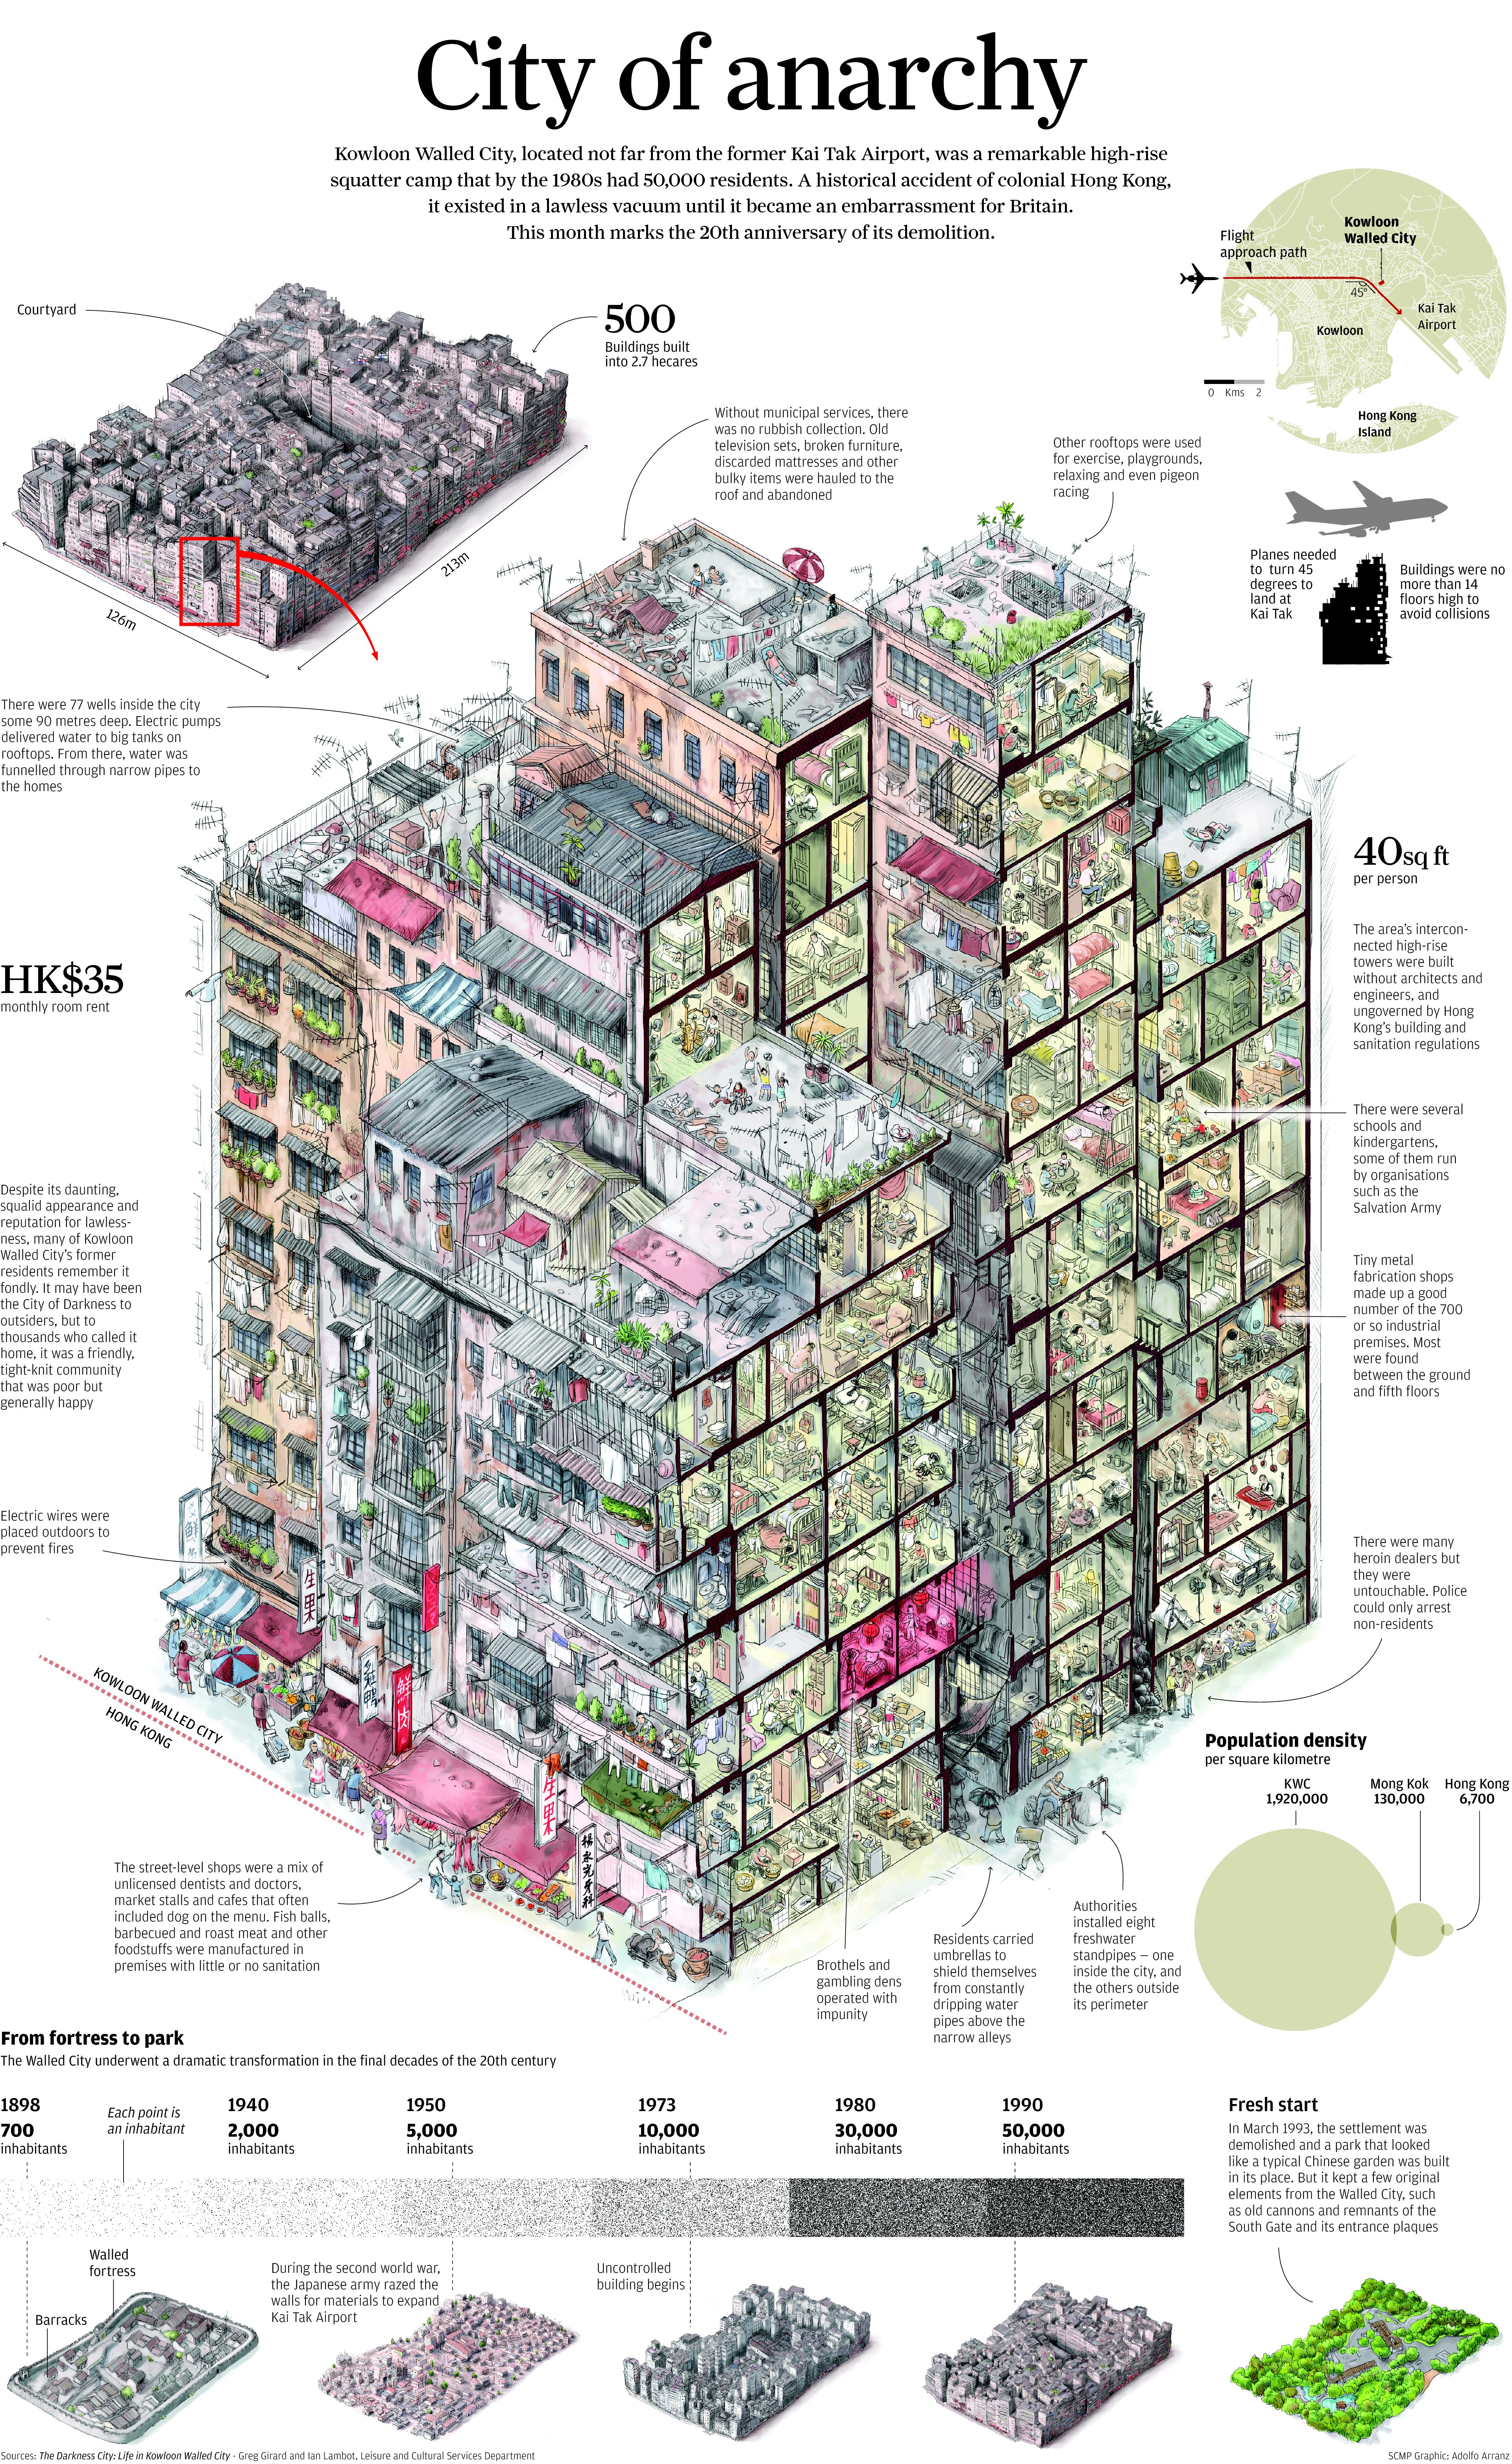 city of darkness life in kowloon walled city